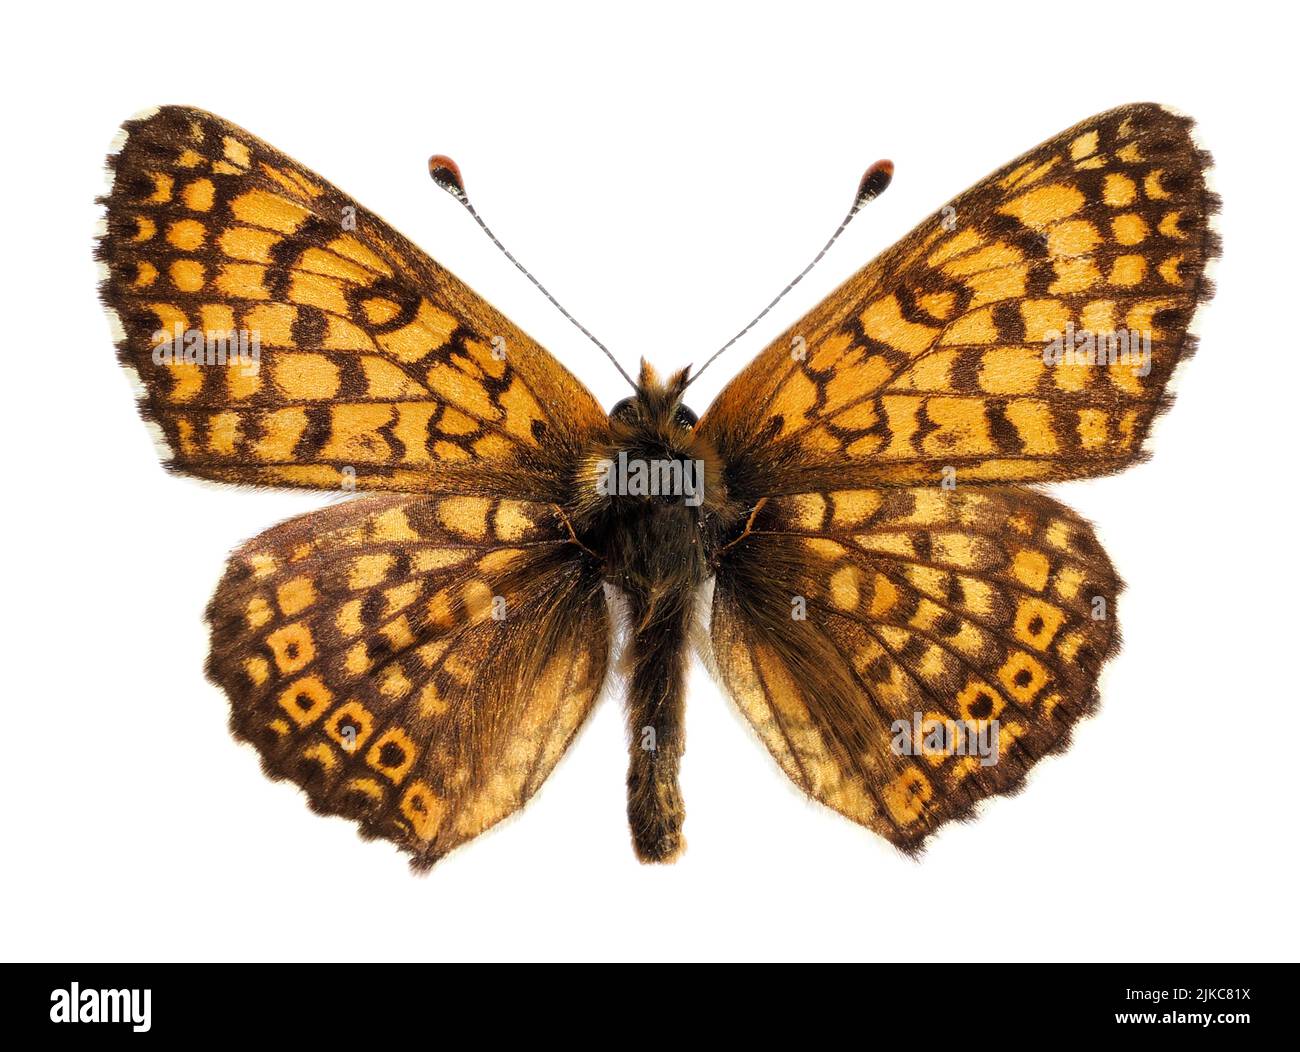 The Glanville fritillary (Melitaea cinxia) is a butterfly of the family Nymphalidae and isolated on white background. Stock Photo